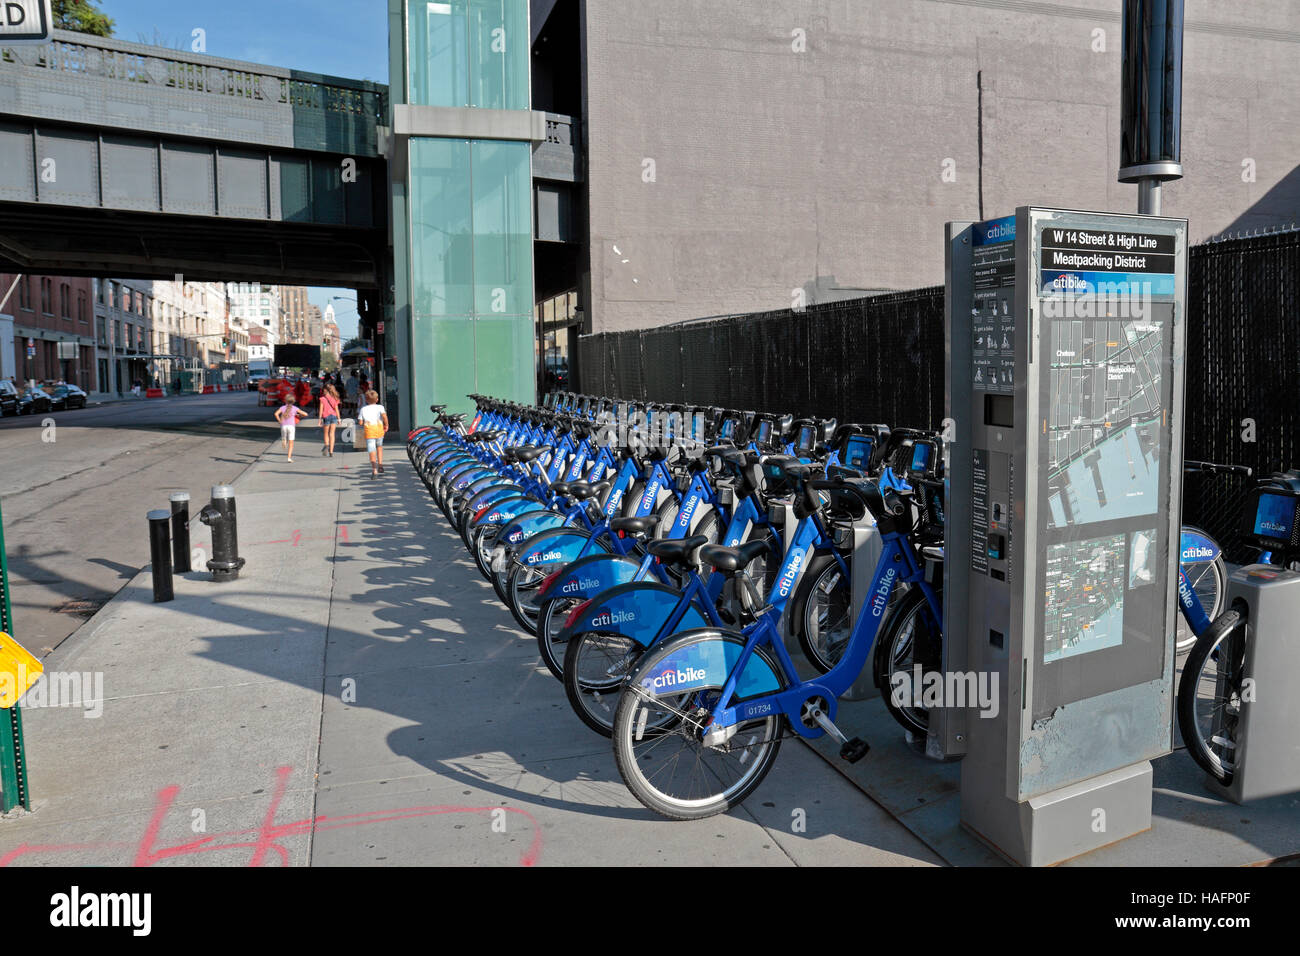 A nearly full bank of Citi Bike bicycles on W 14th Street, close to Chelsea Market, New York City, United States. Stock Photo